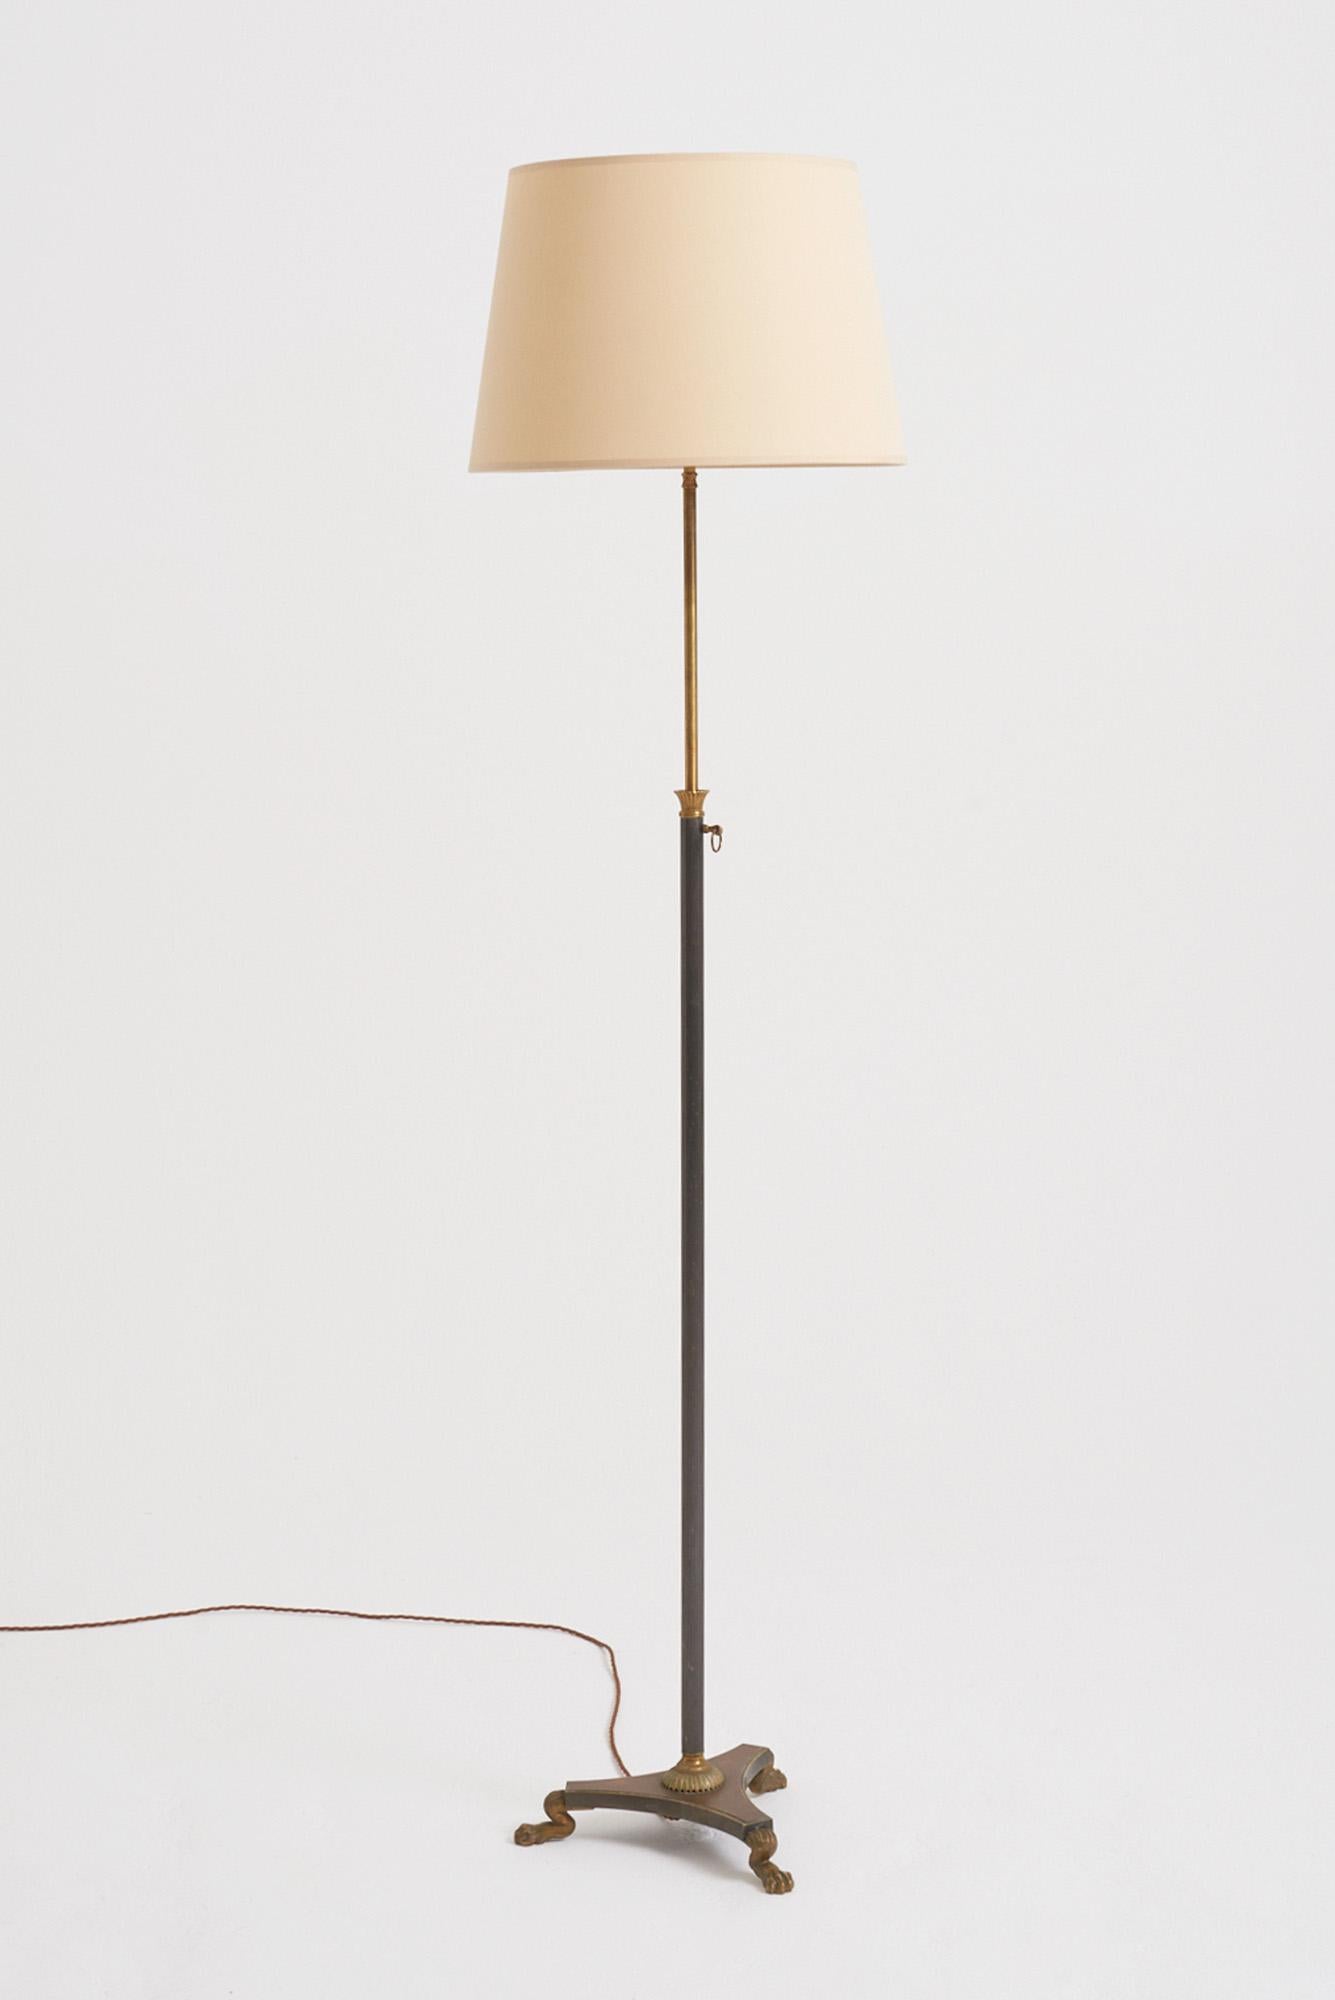 French Brass Neoclassical Floor Lamp, 1940s